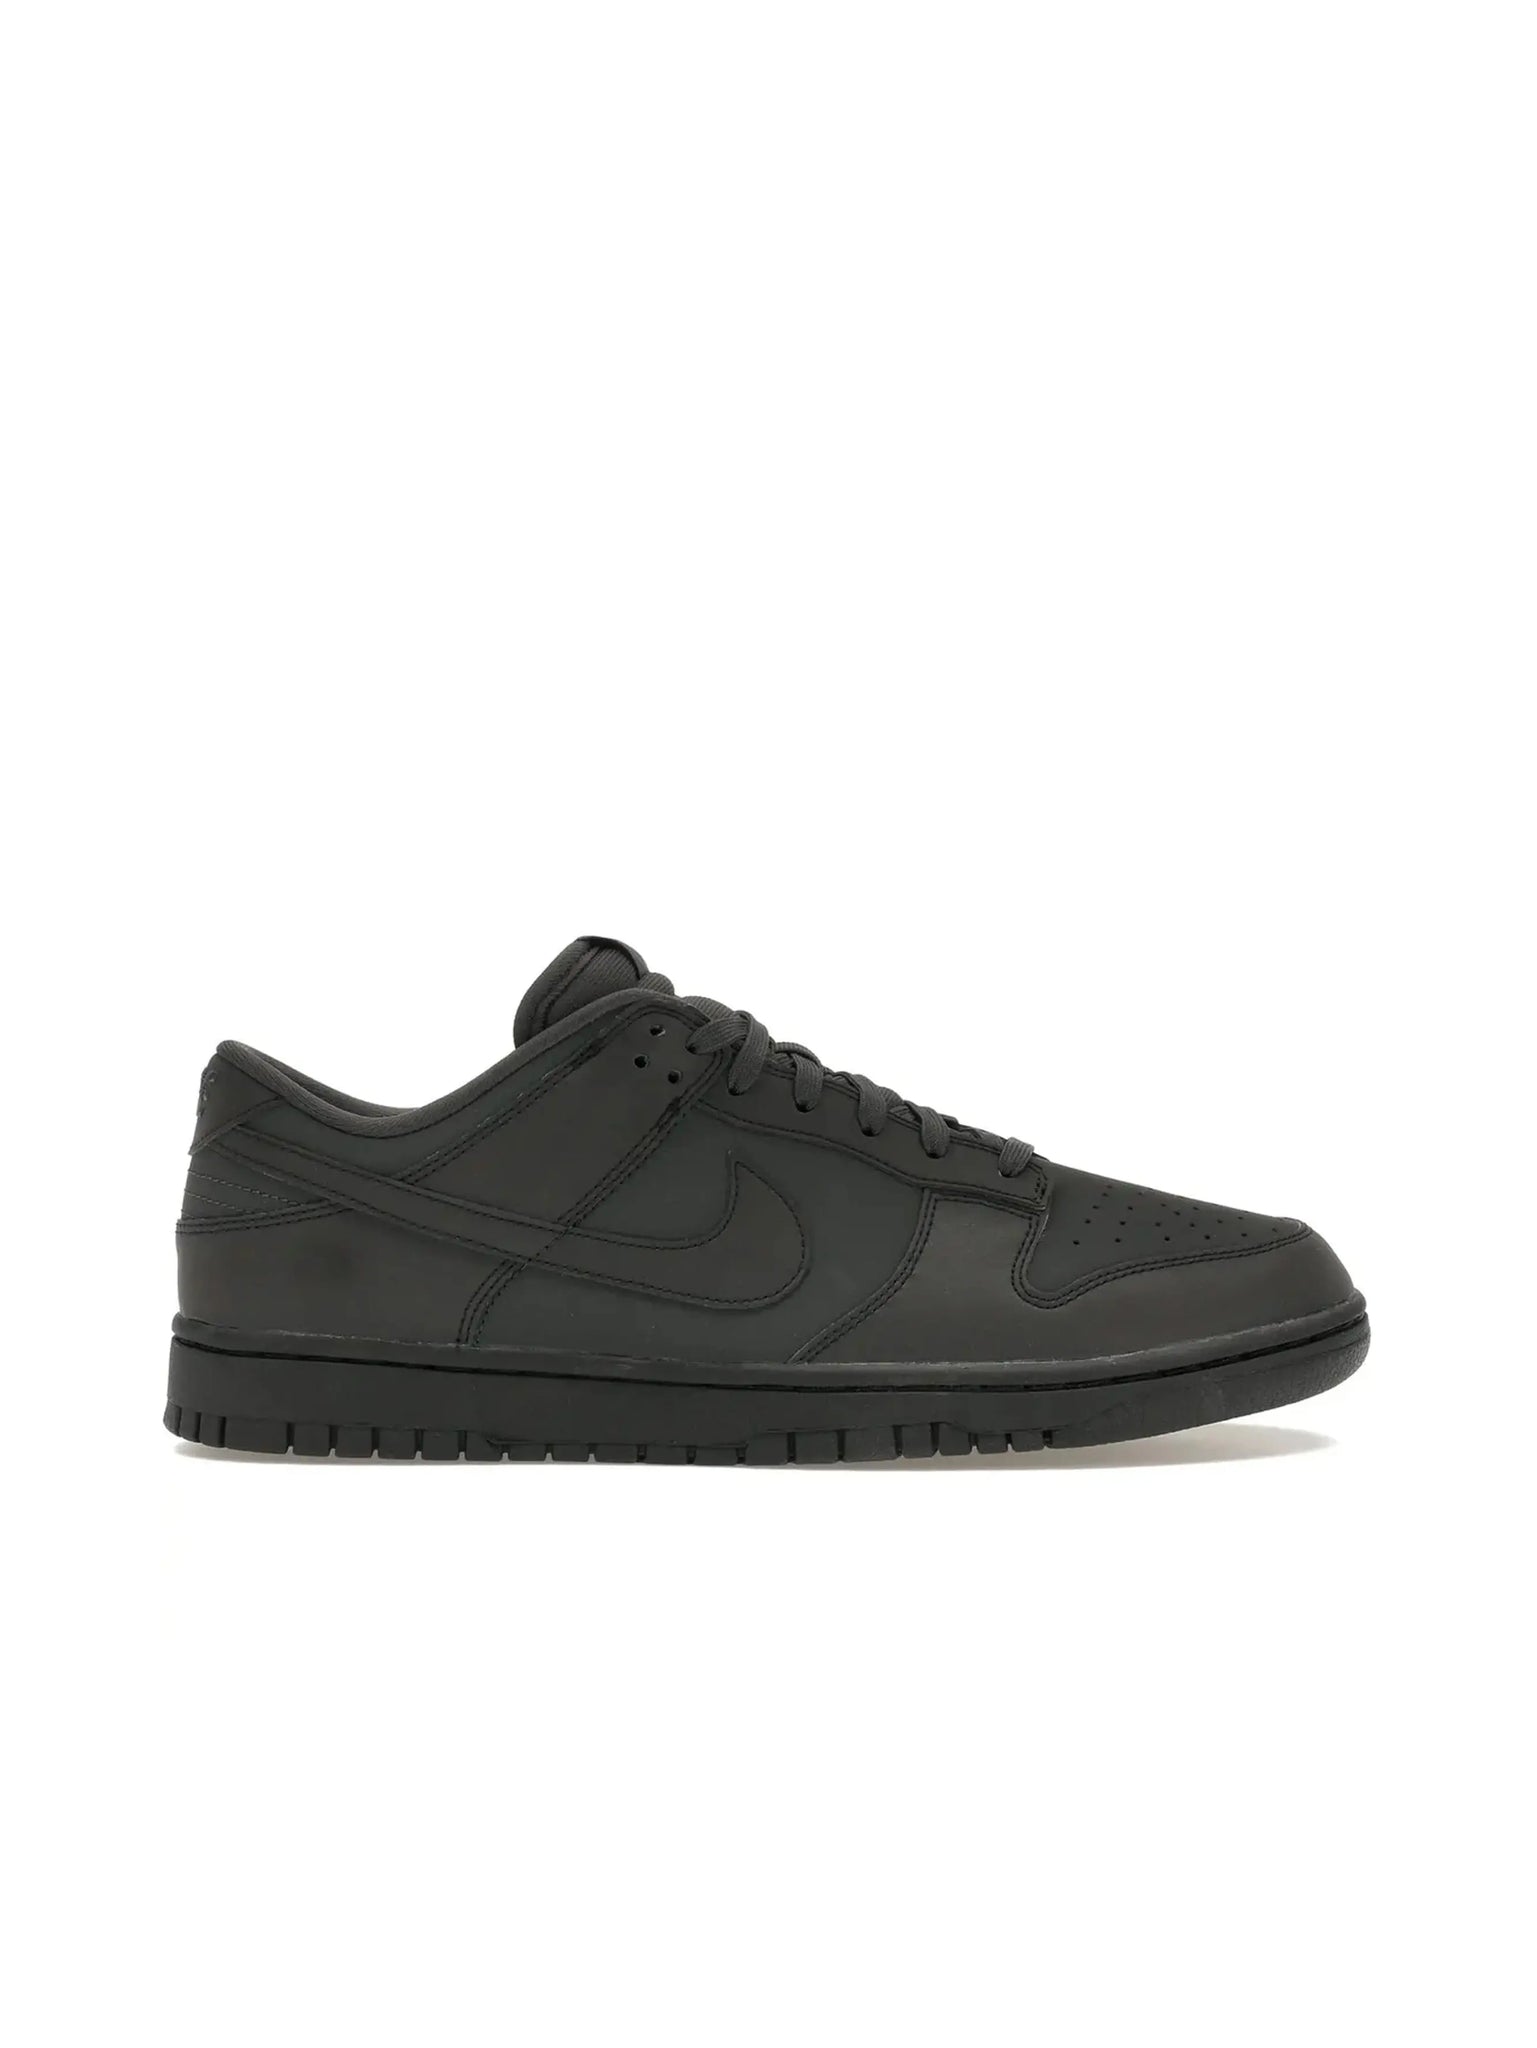 Nike Dunk Low Cyber Reflective (Women's) in Auckland, New Zealand - Shop name